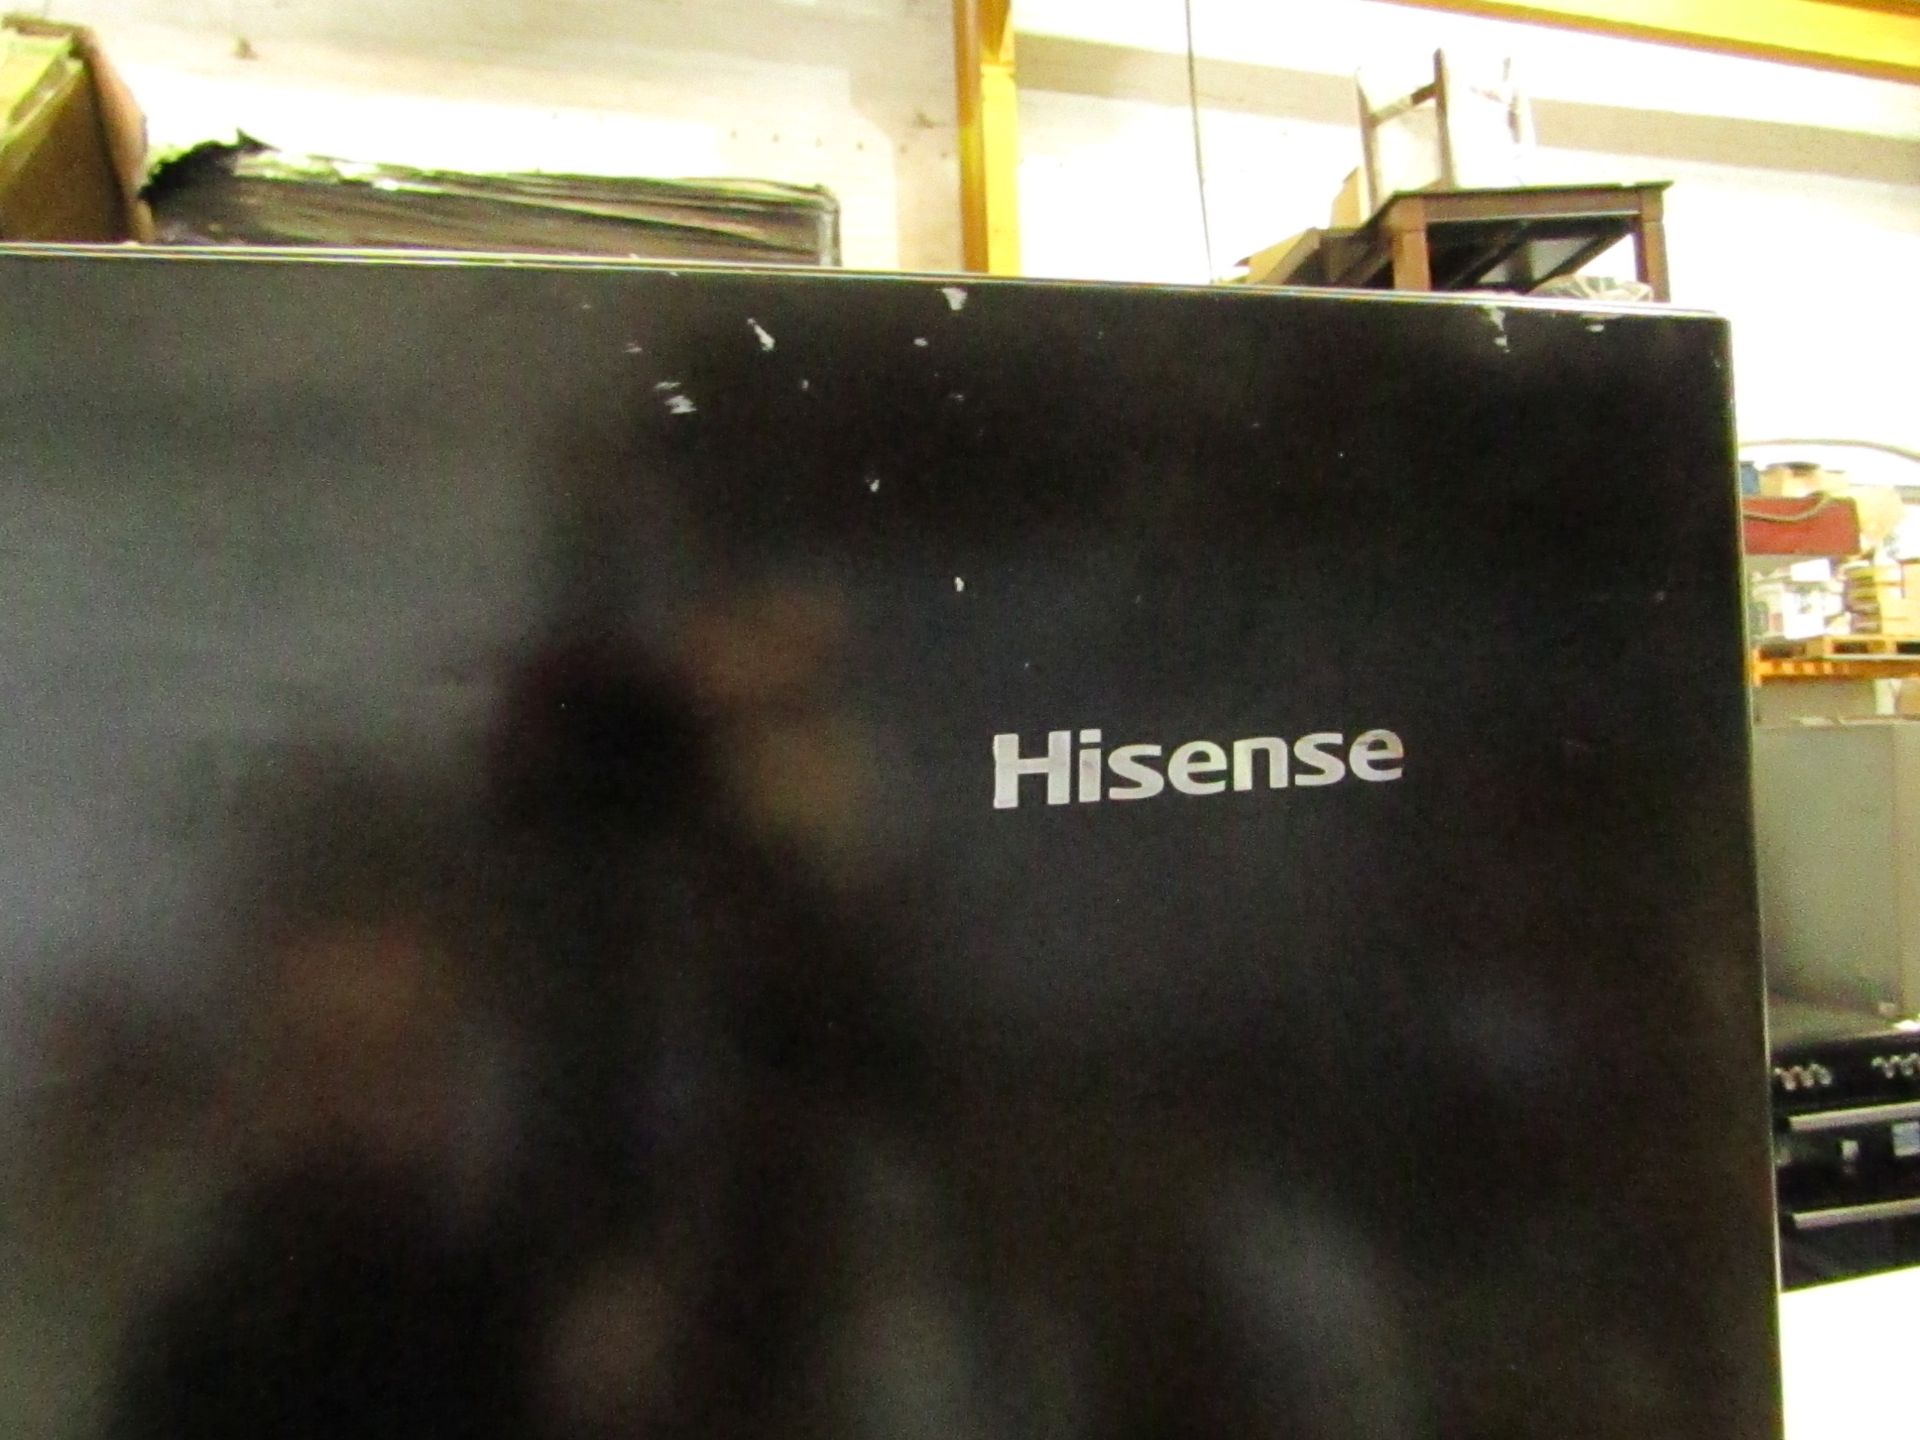 HISENSE American Fridge Freezer Black RQ560N4WBI RRP ??600.00 - The items in this lot are thought to - Image 4 of 4